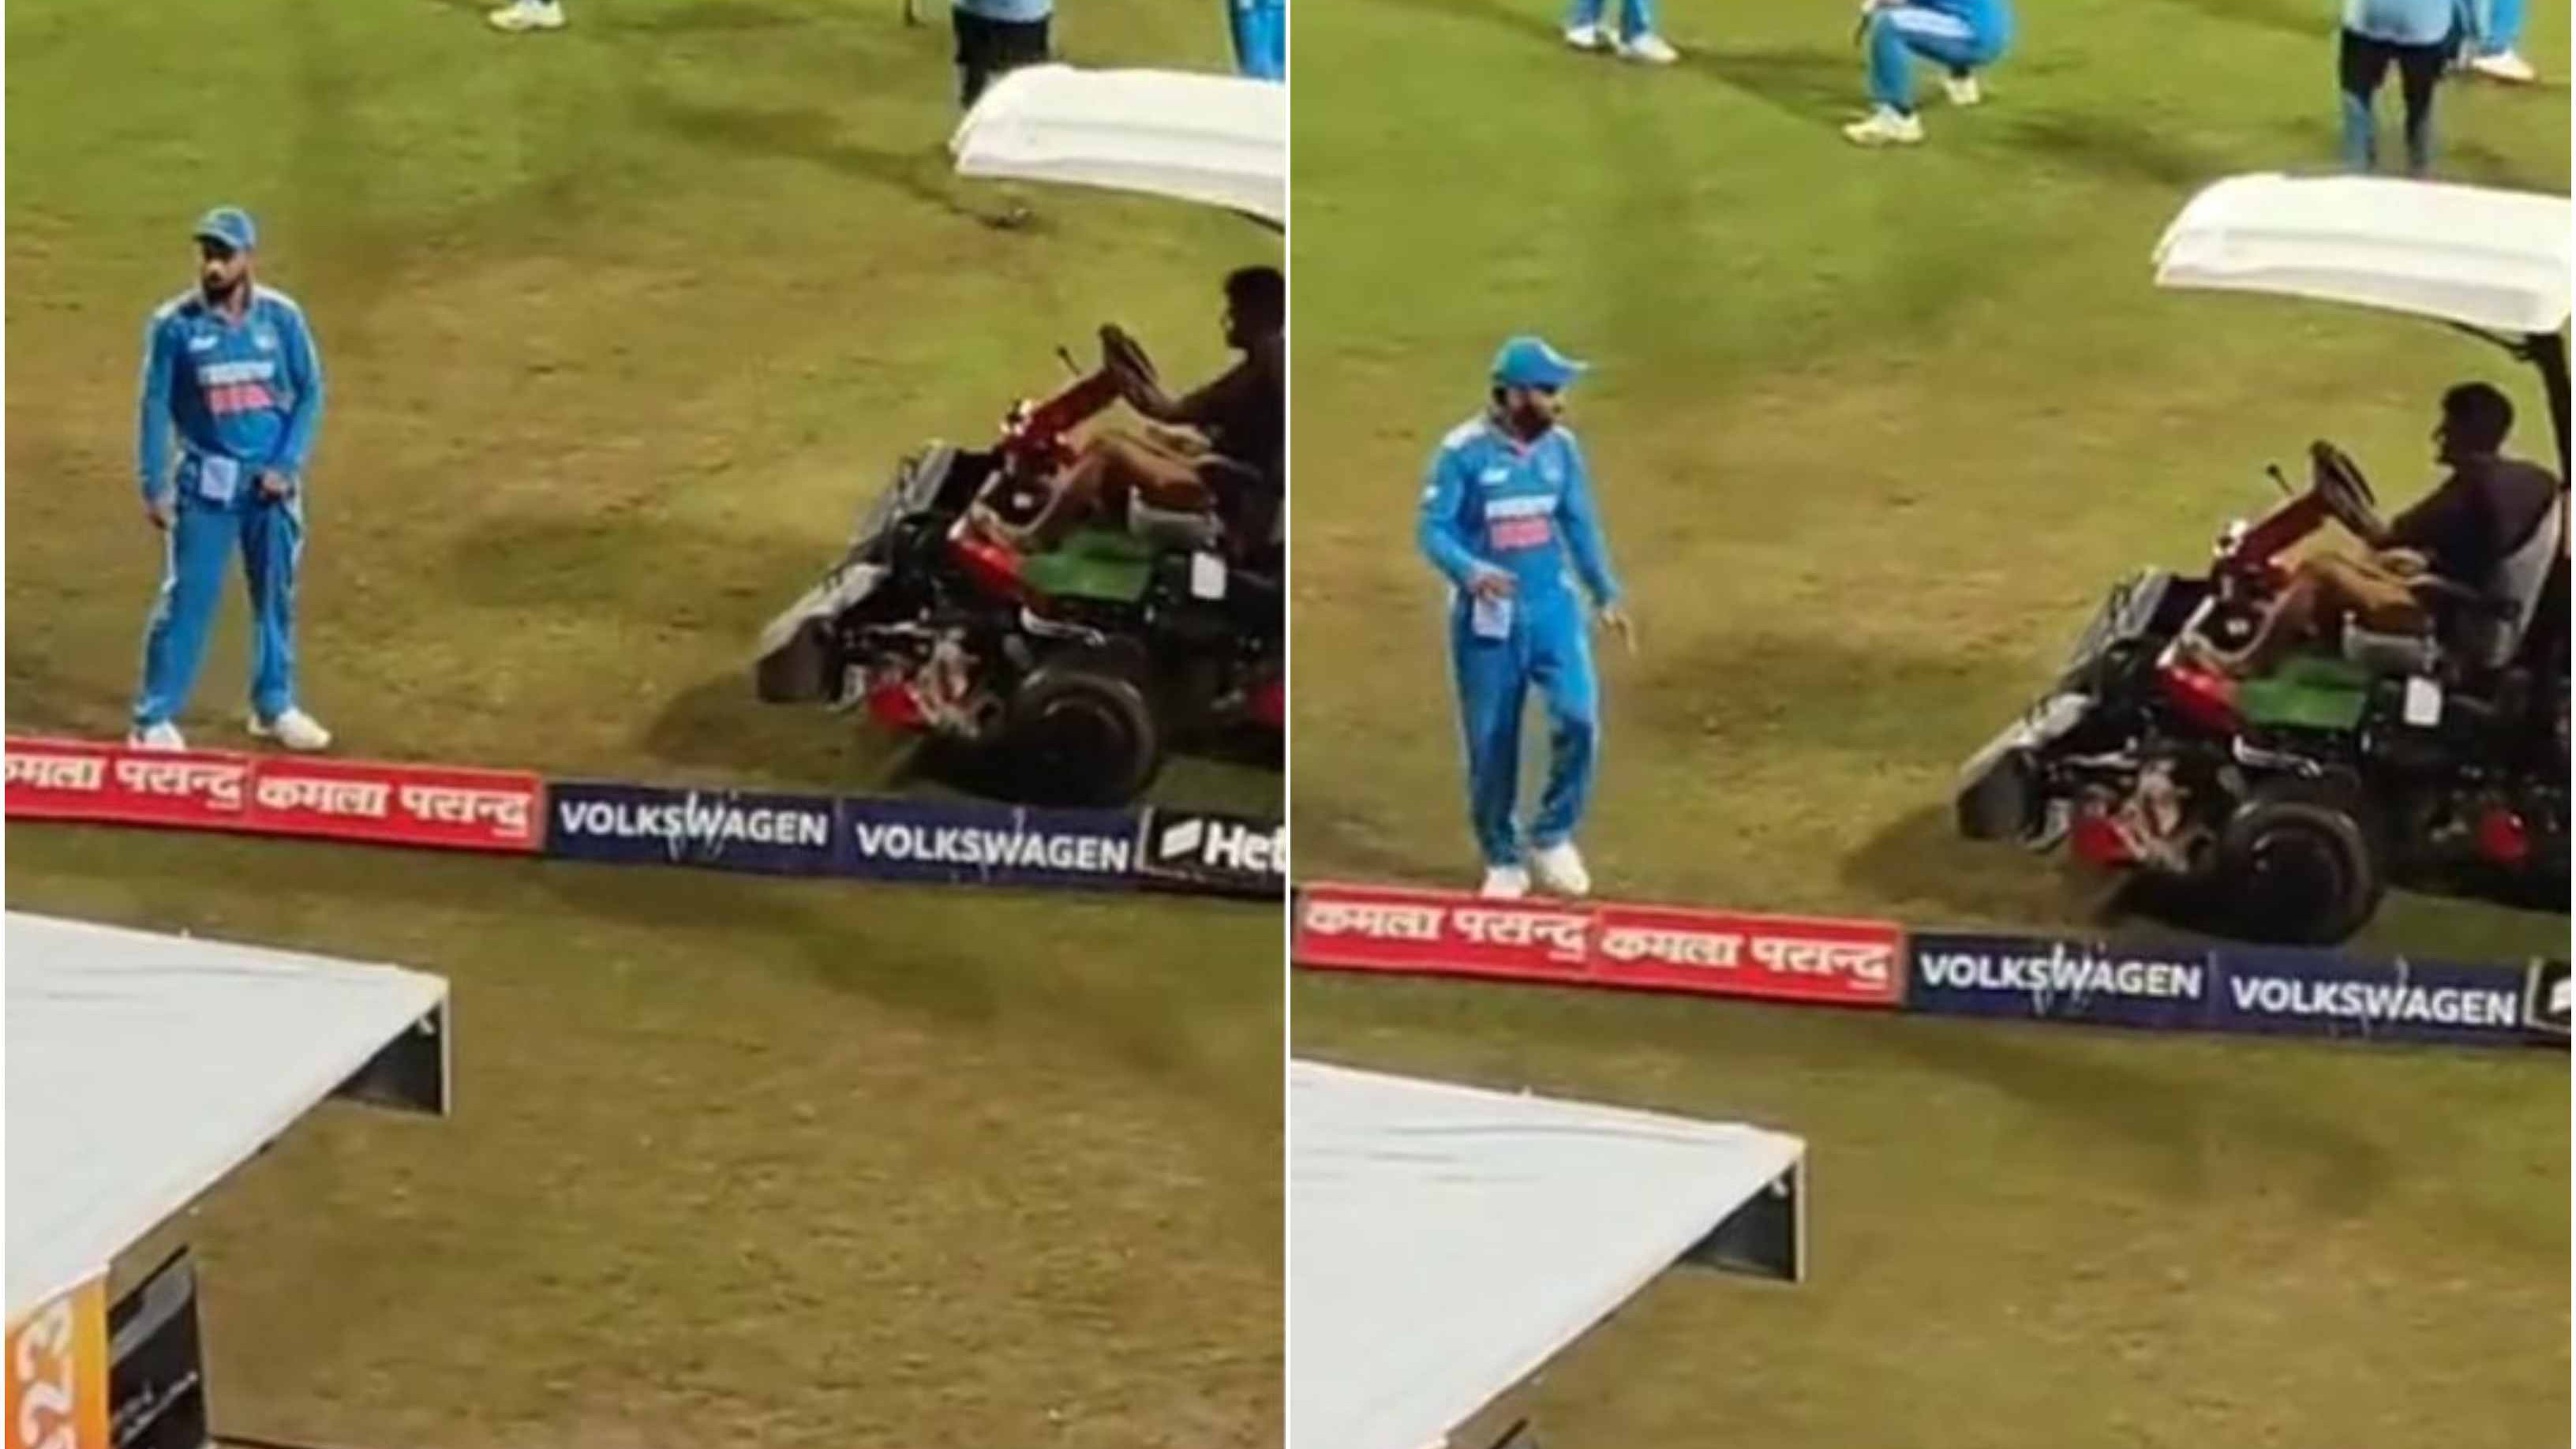 Asia Cup 2023: WATCH – Virat Kohli’s reaction breaks the internet as super sopper operator scares him by blowing horn